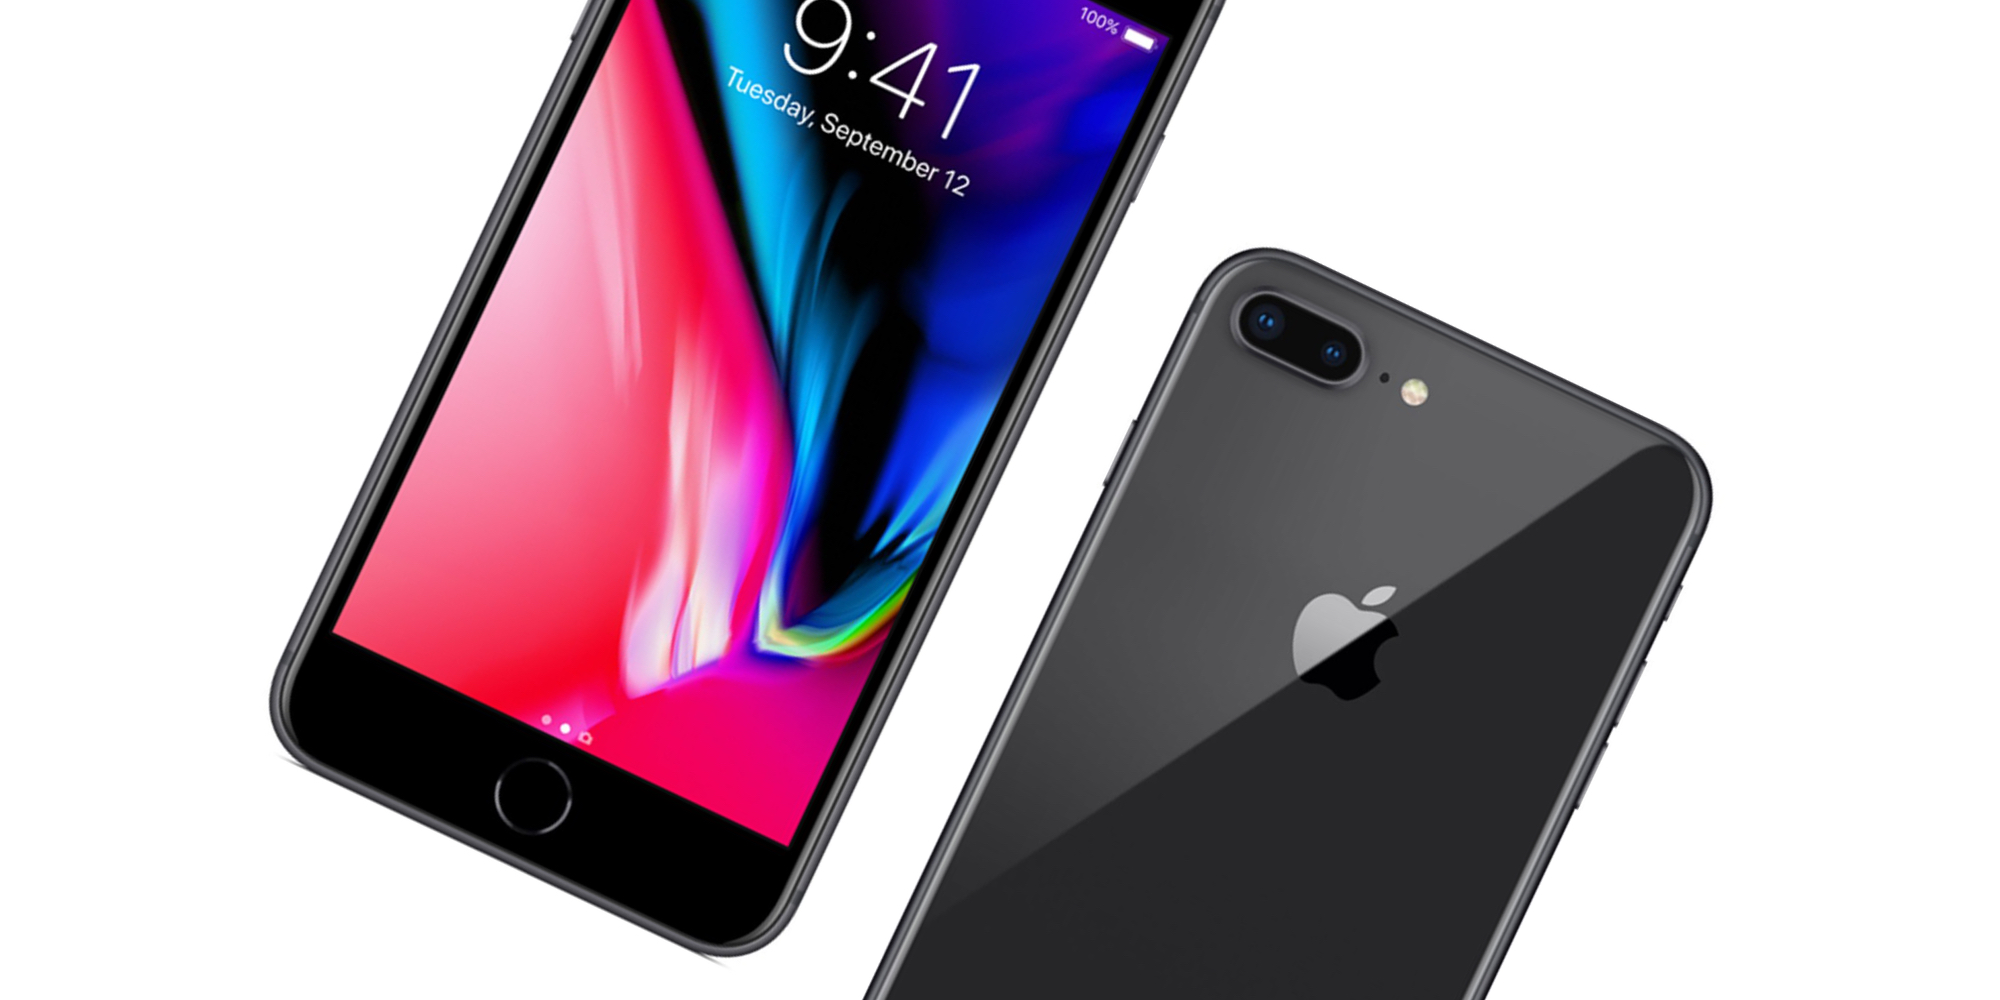 iOS 14 code confirms Apple planning 'iPhone 9 Plus' with A13 as